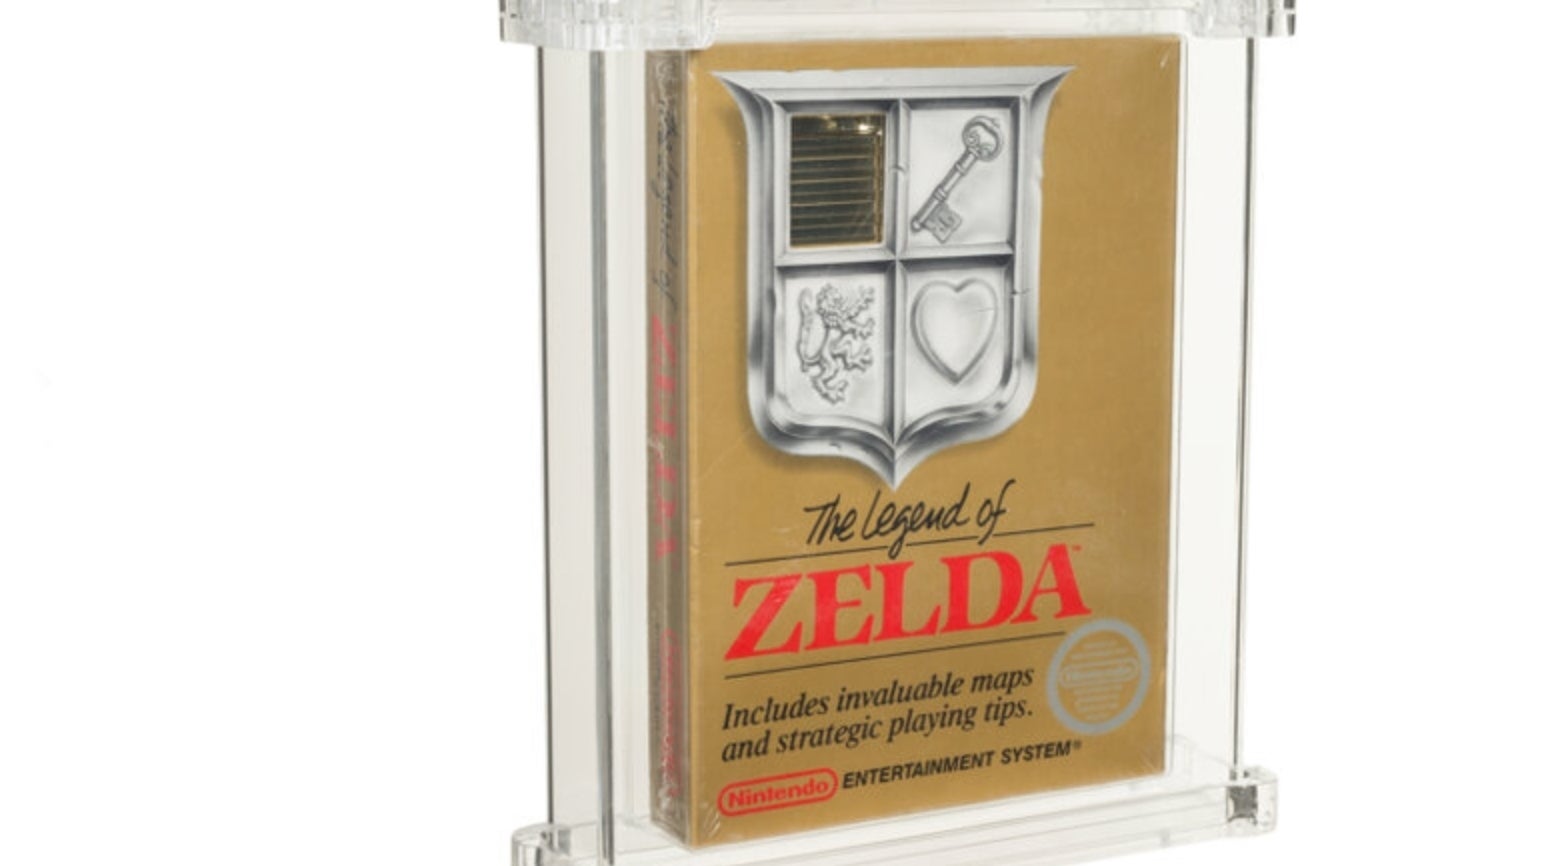 Image for You can own this rare 1987 version of The Legend of Zelda for $110,000 (and rising)